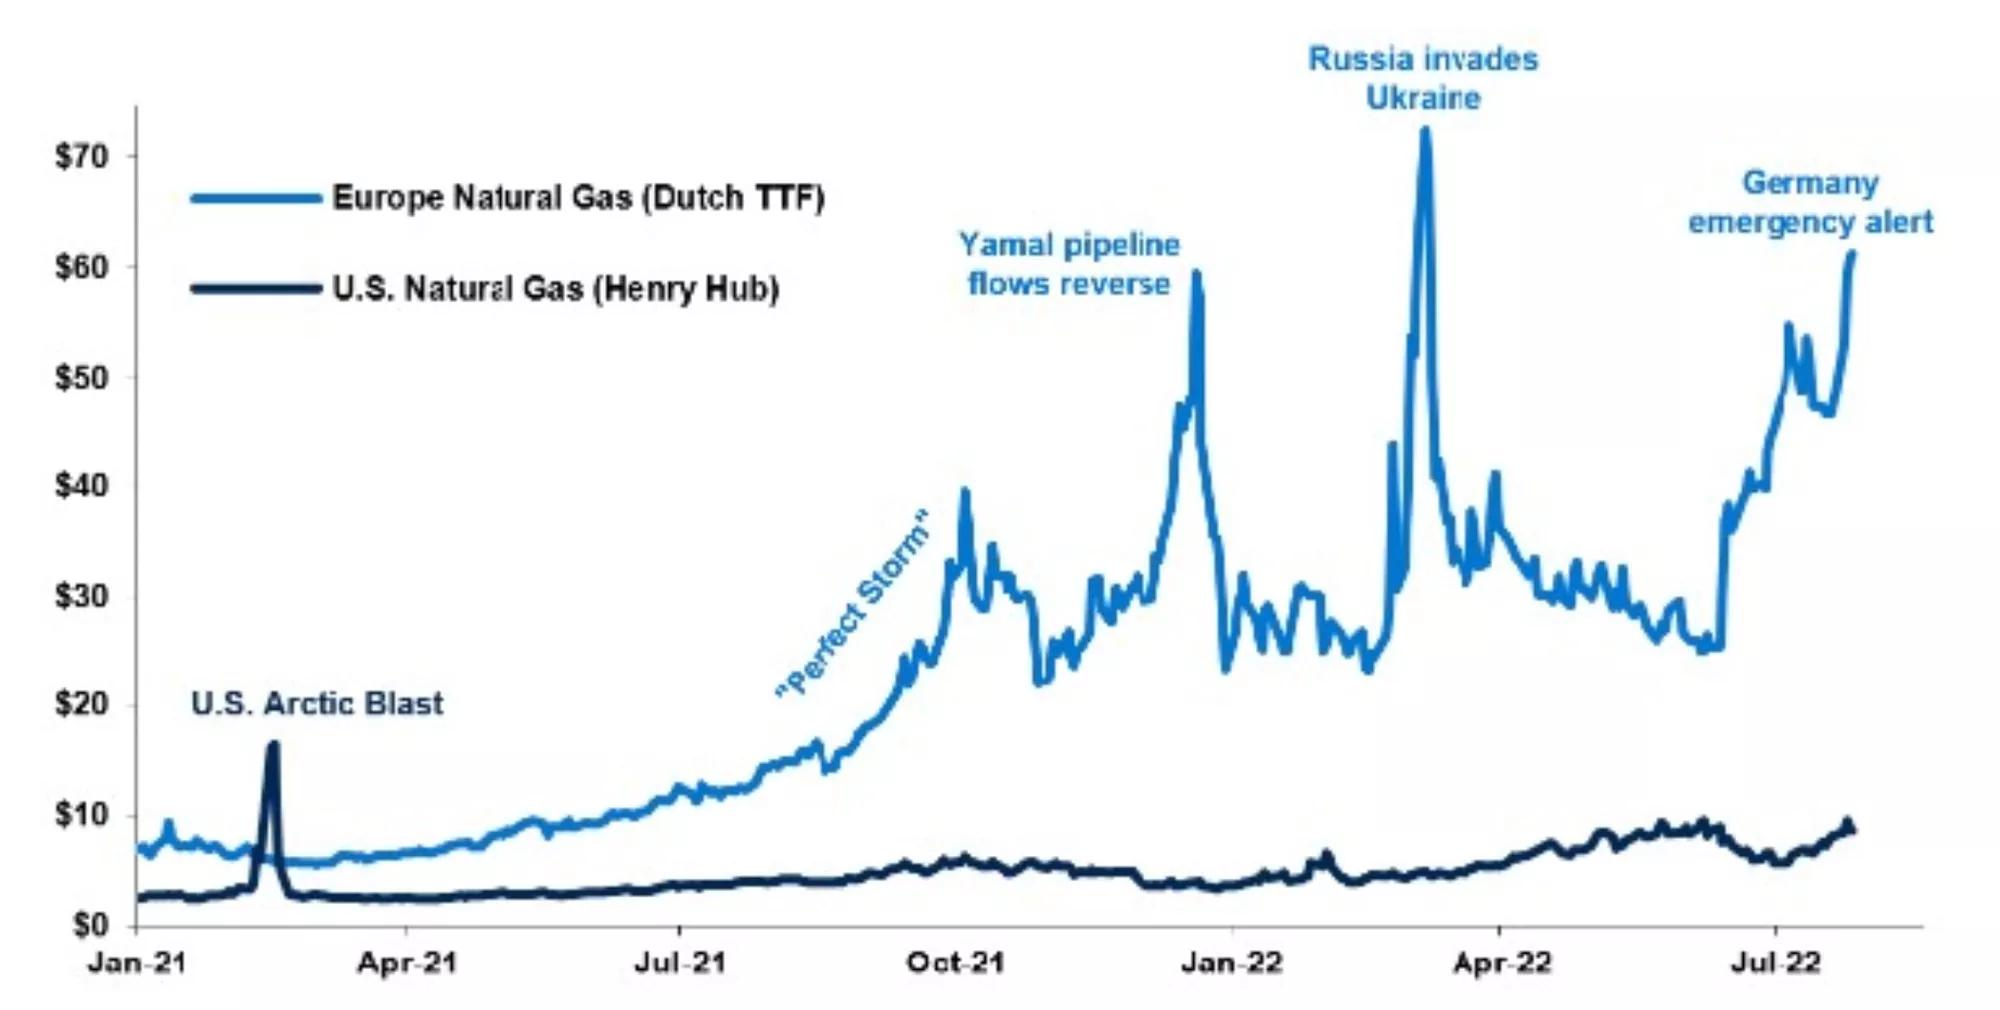 Chart showing Europe and U.S. natural gas prices from January 2021 to July 2022